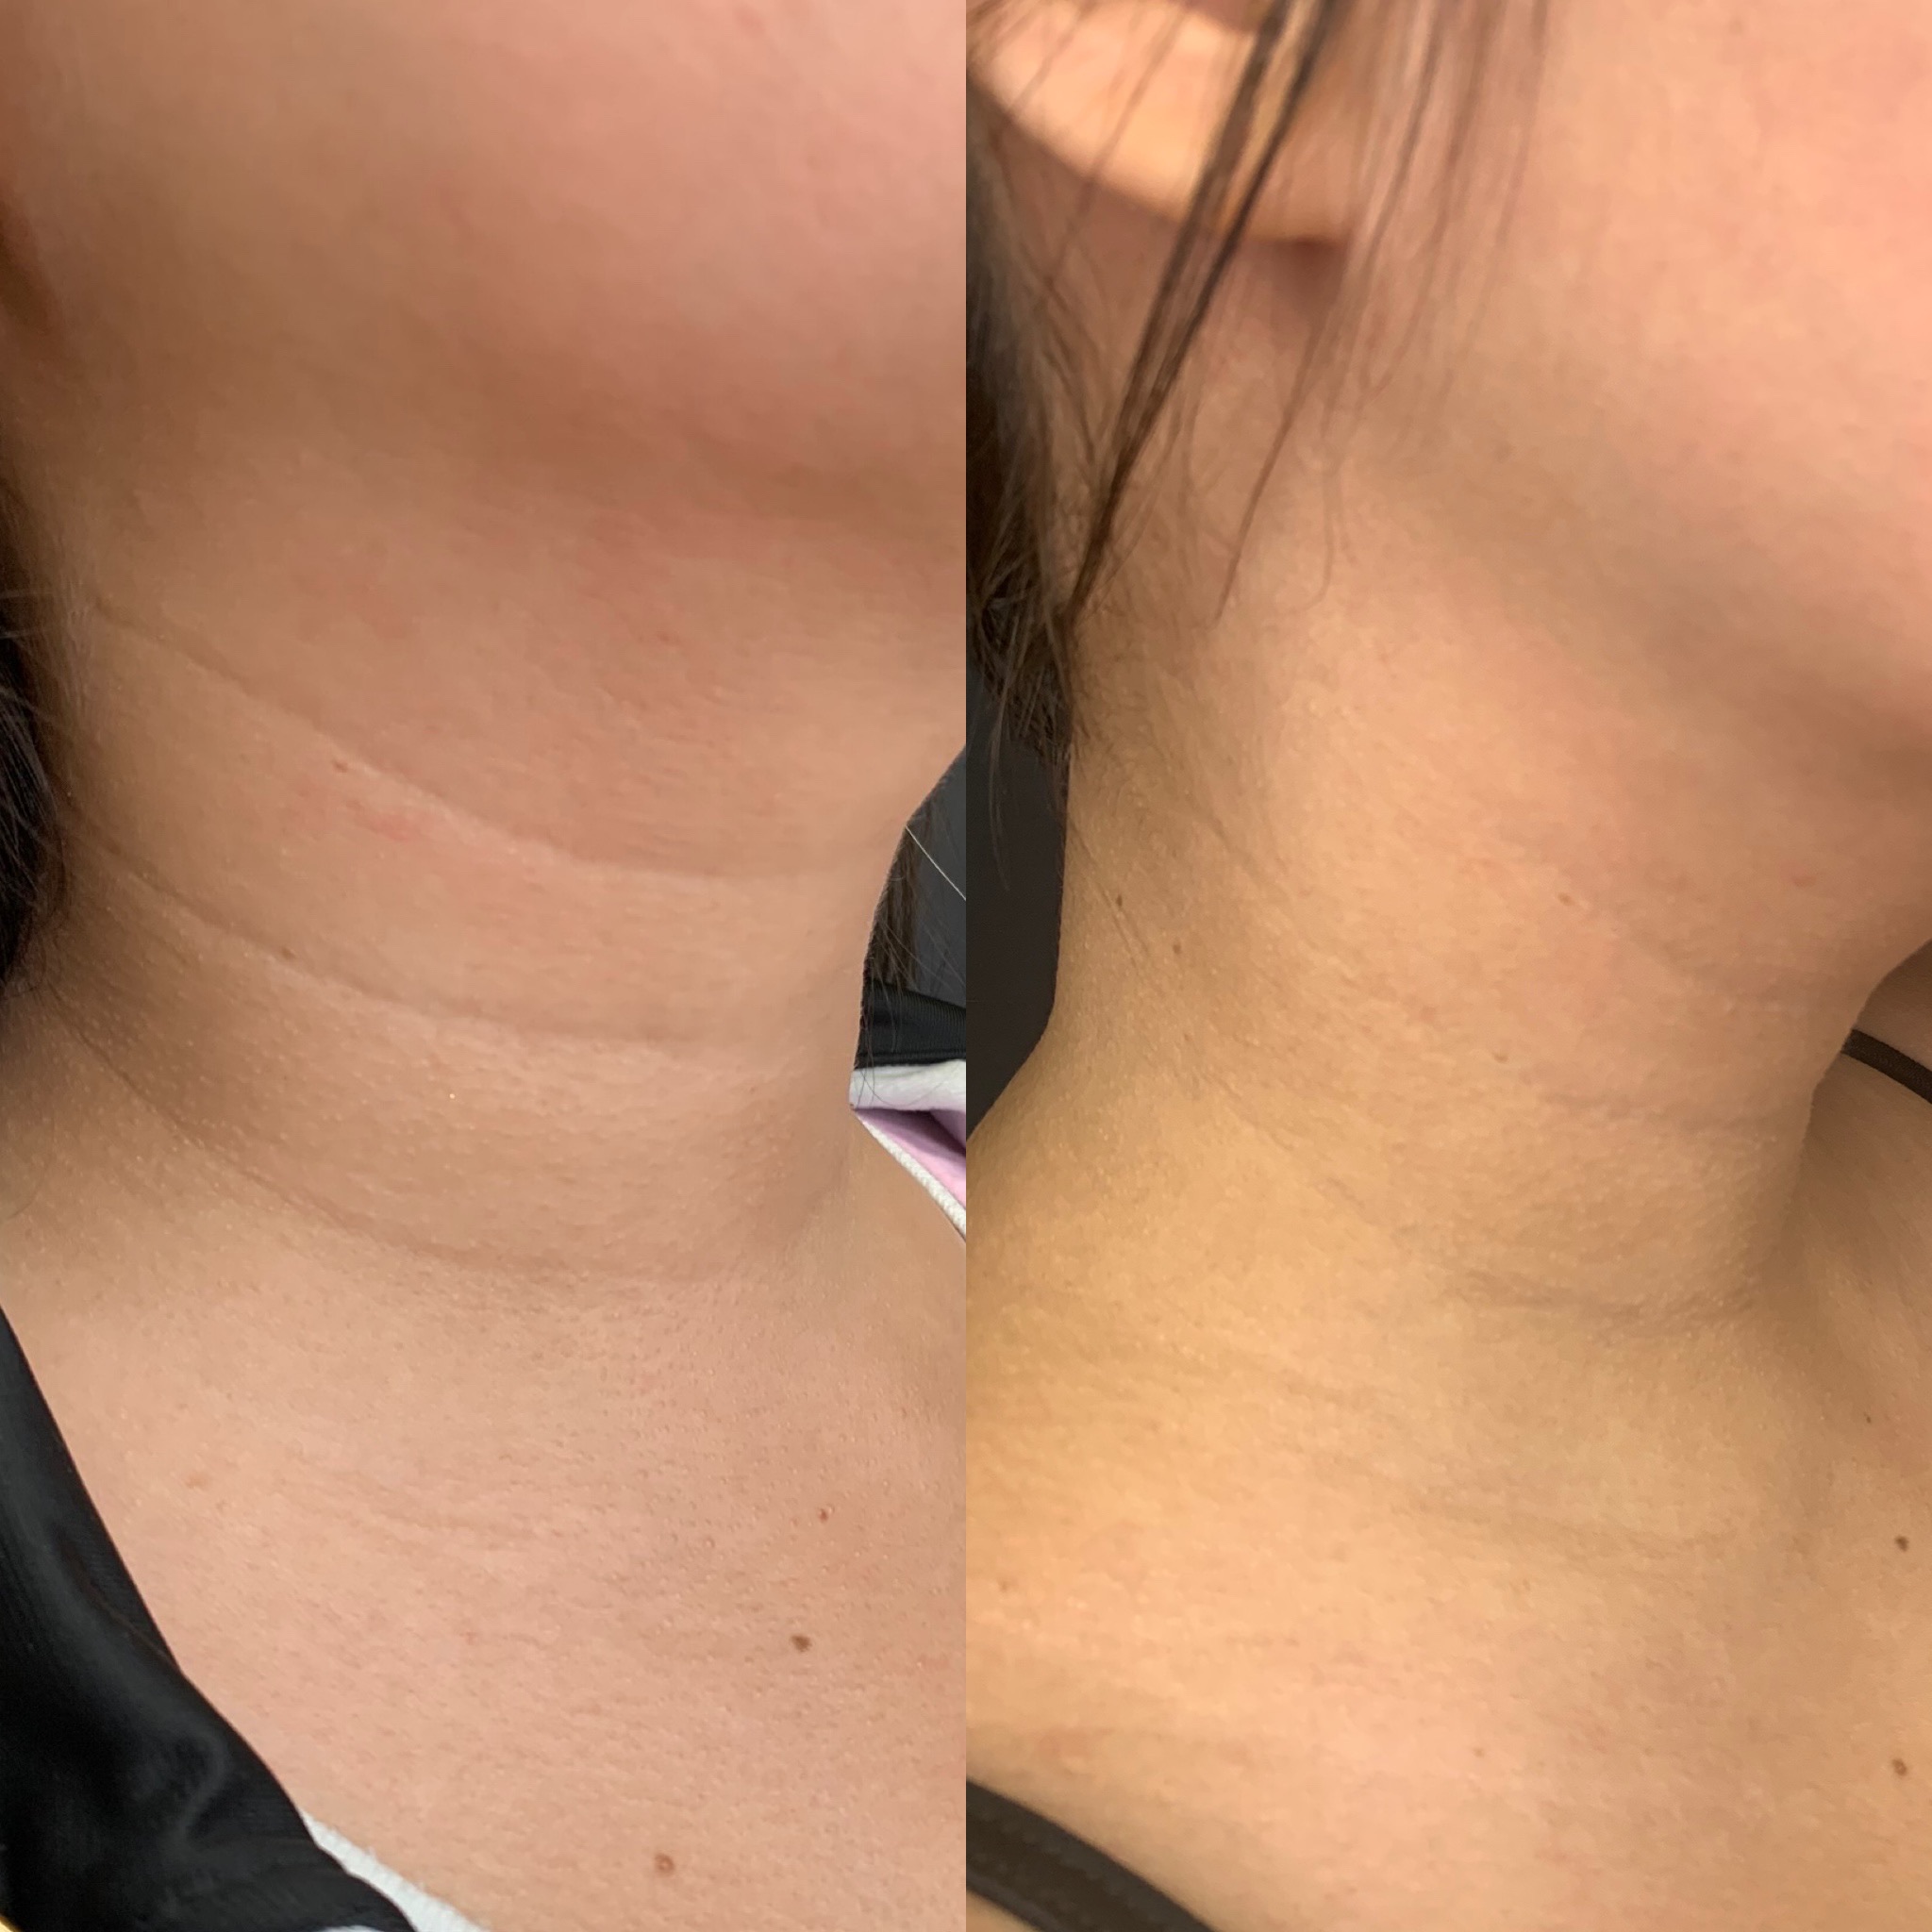 Before and After Fillers Treatment on Neck | Beauty Boost Med Spa in Newport Beach, CA